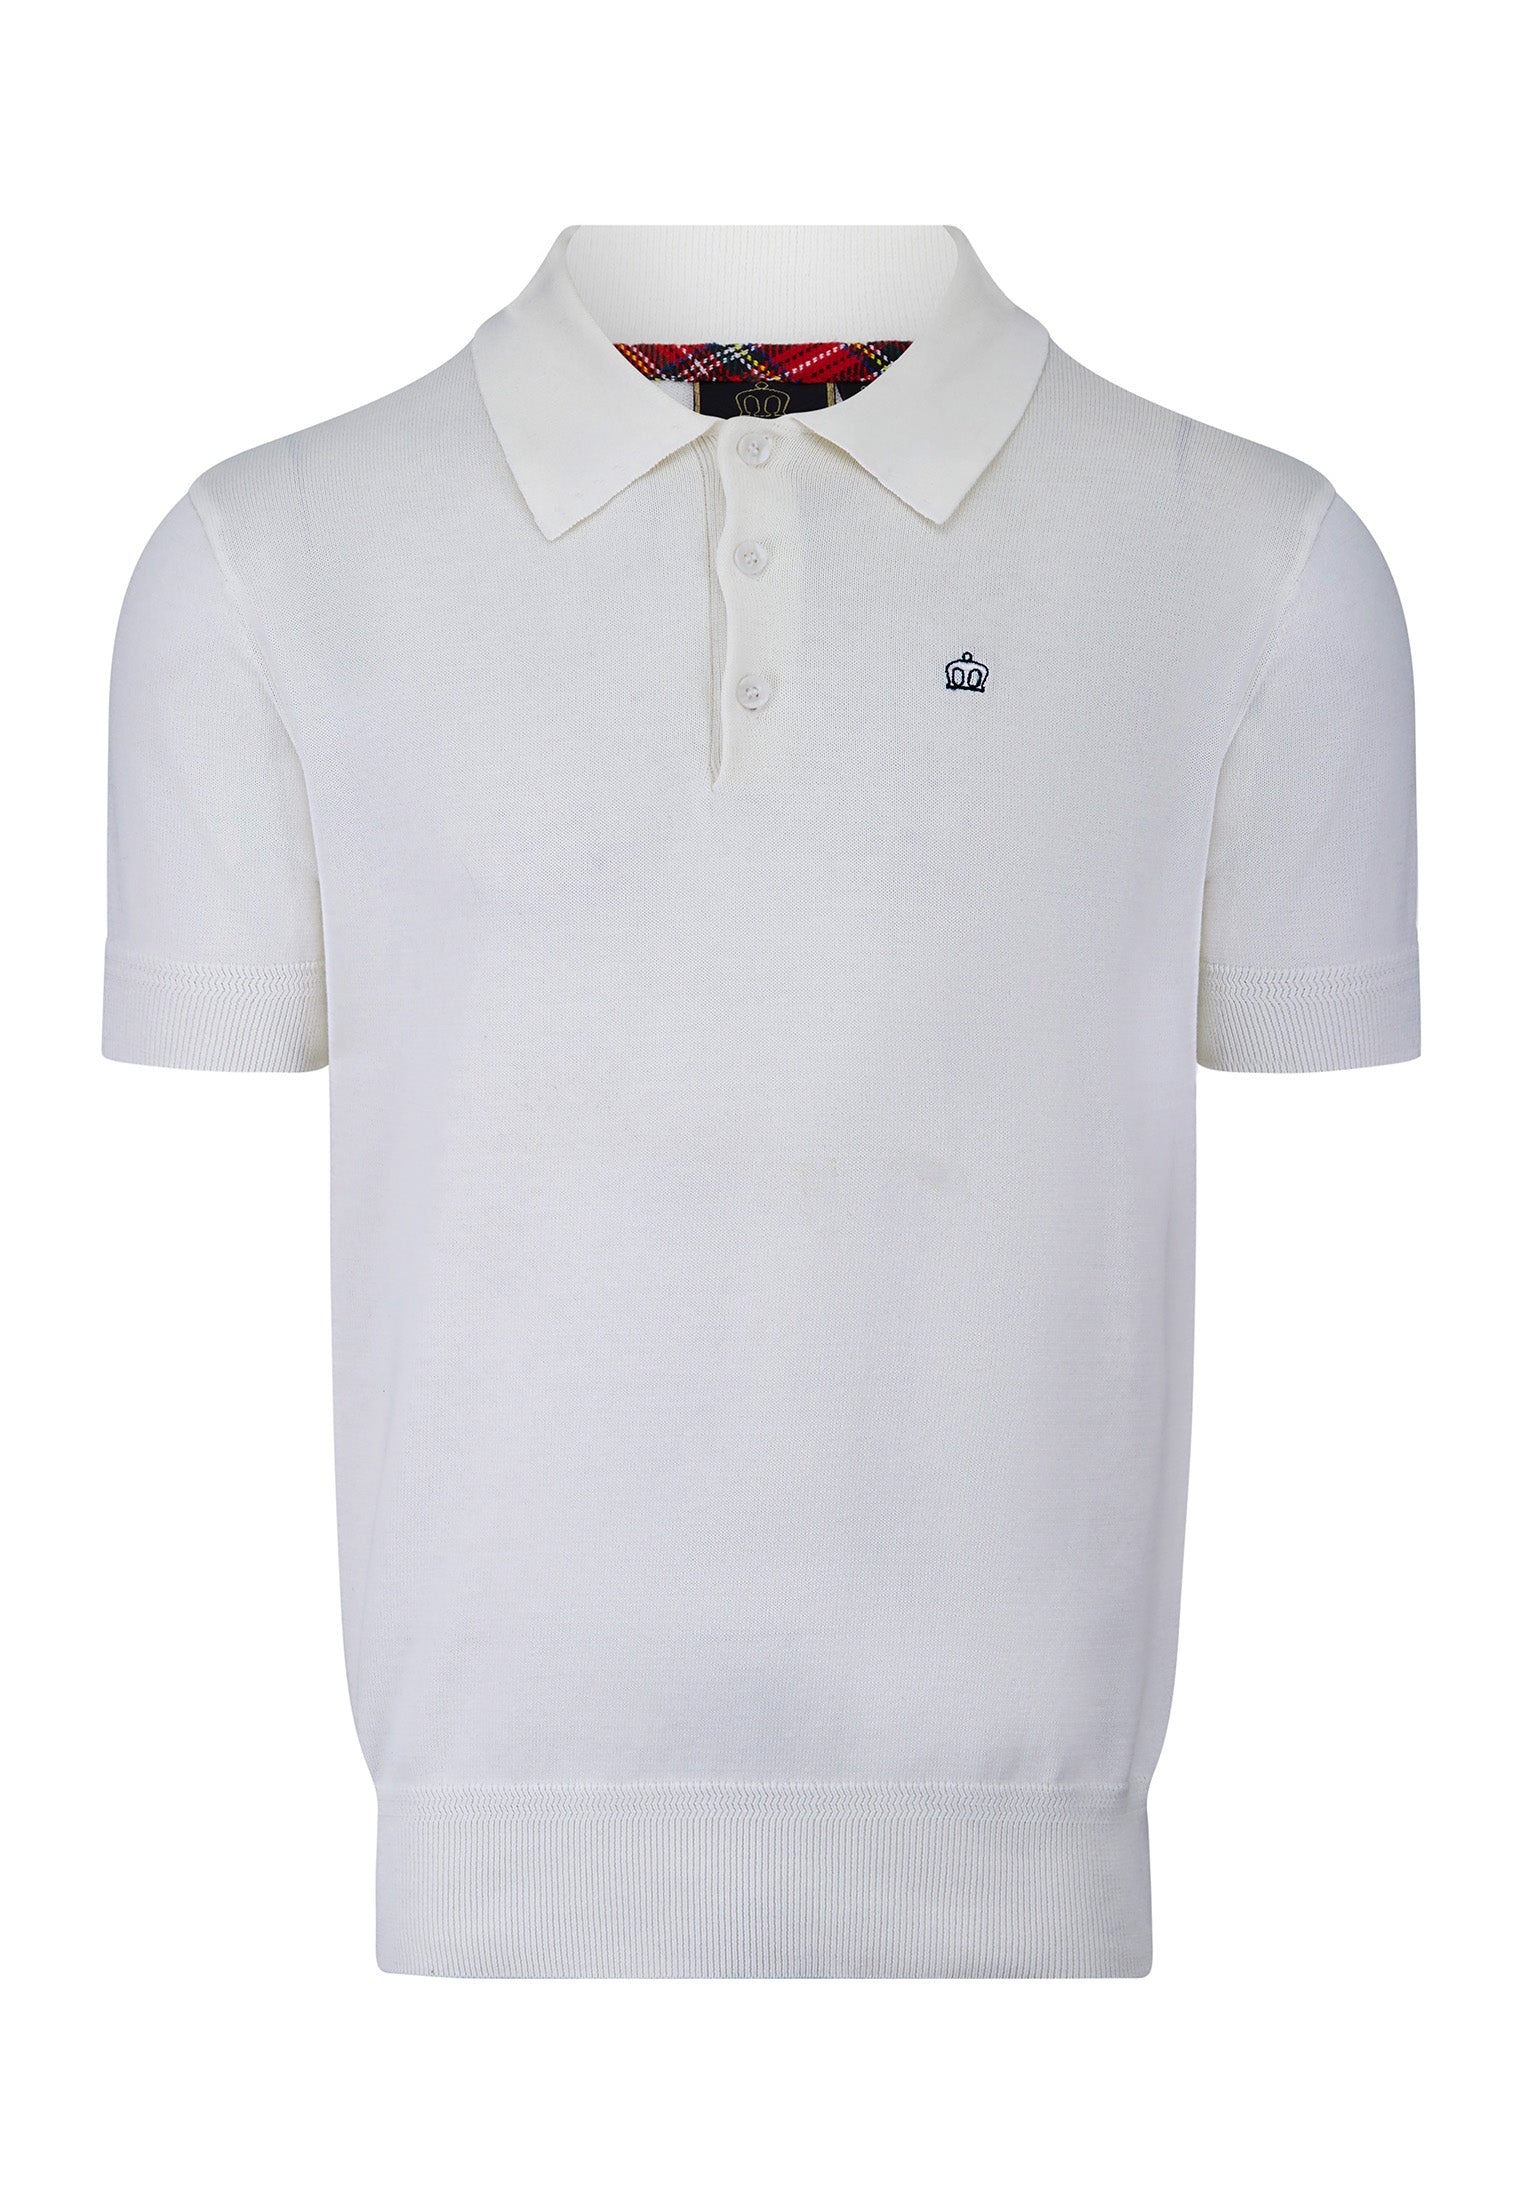 Super Soft Knitted Polo Shirt In White by Merc